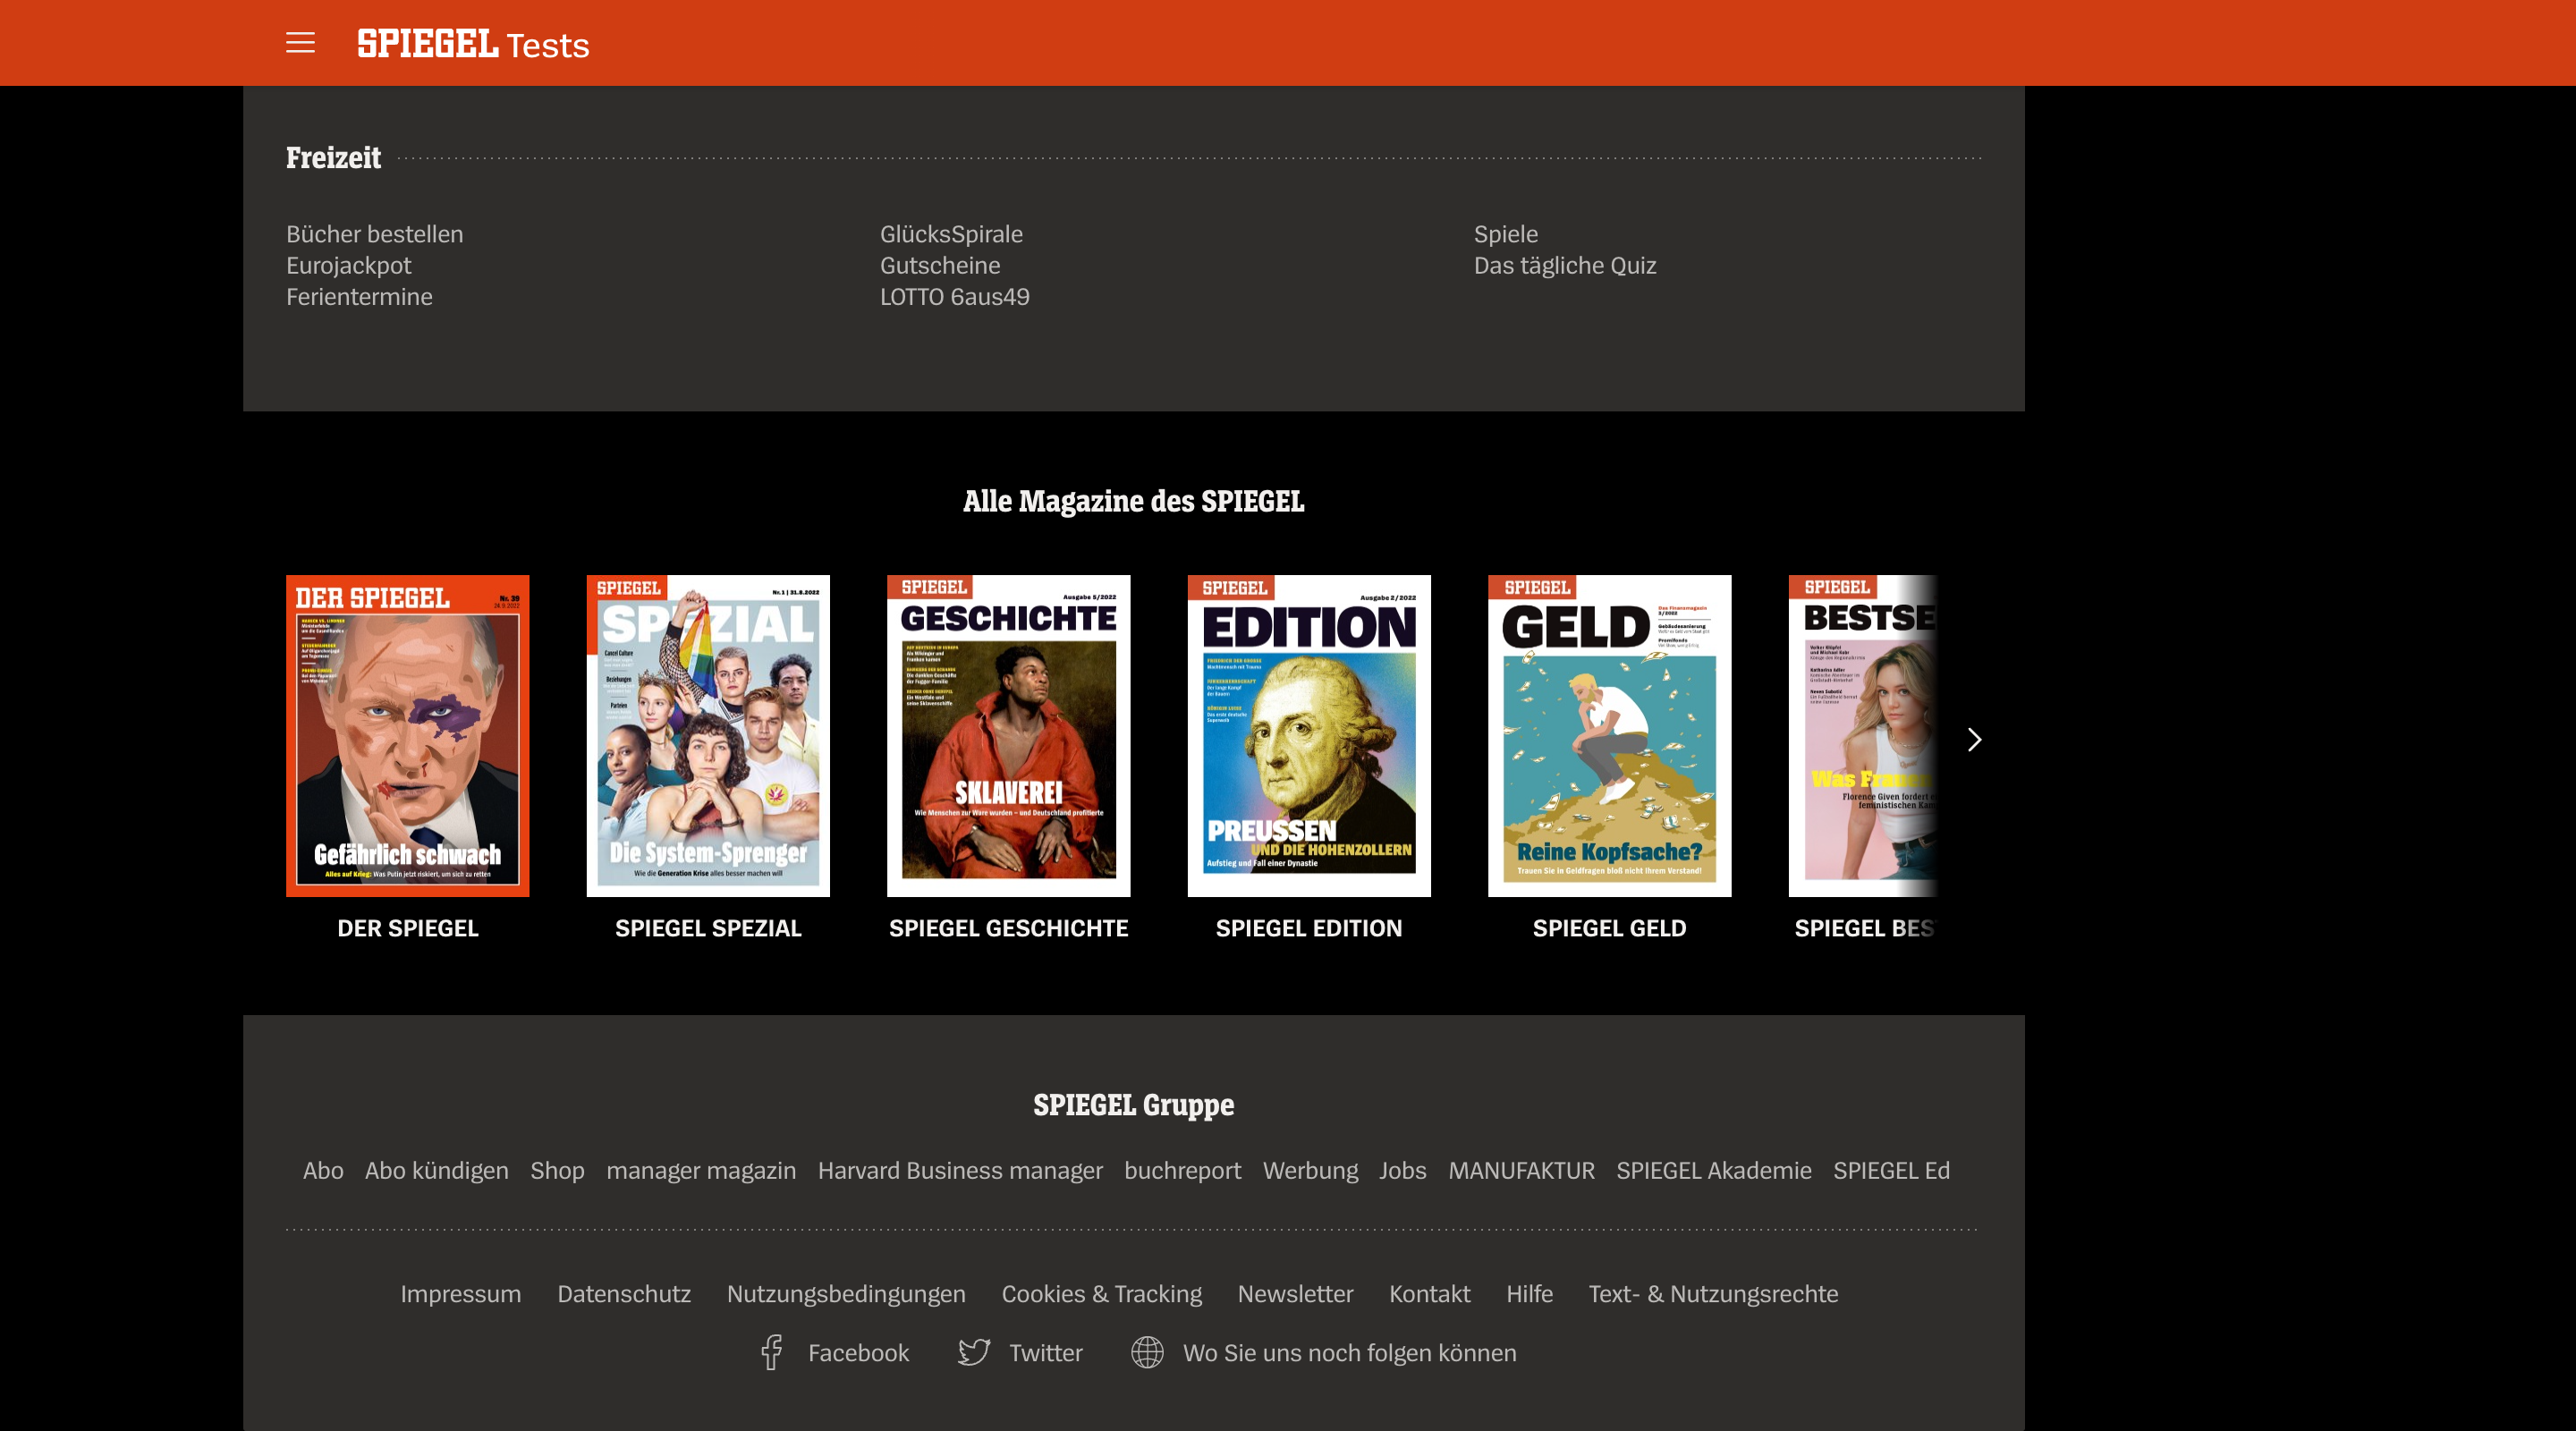 Screenshot of the Der Spiegel website footer. The header contains a menu button and the Spiegel logo. Below that there is a row of magazine cover images that extend off screen. At the bottom of the screen there is a list of page links followed by social media links.